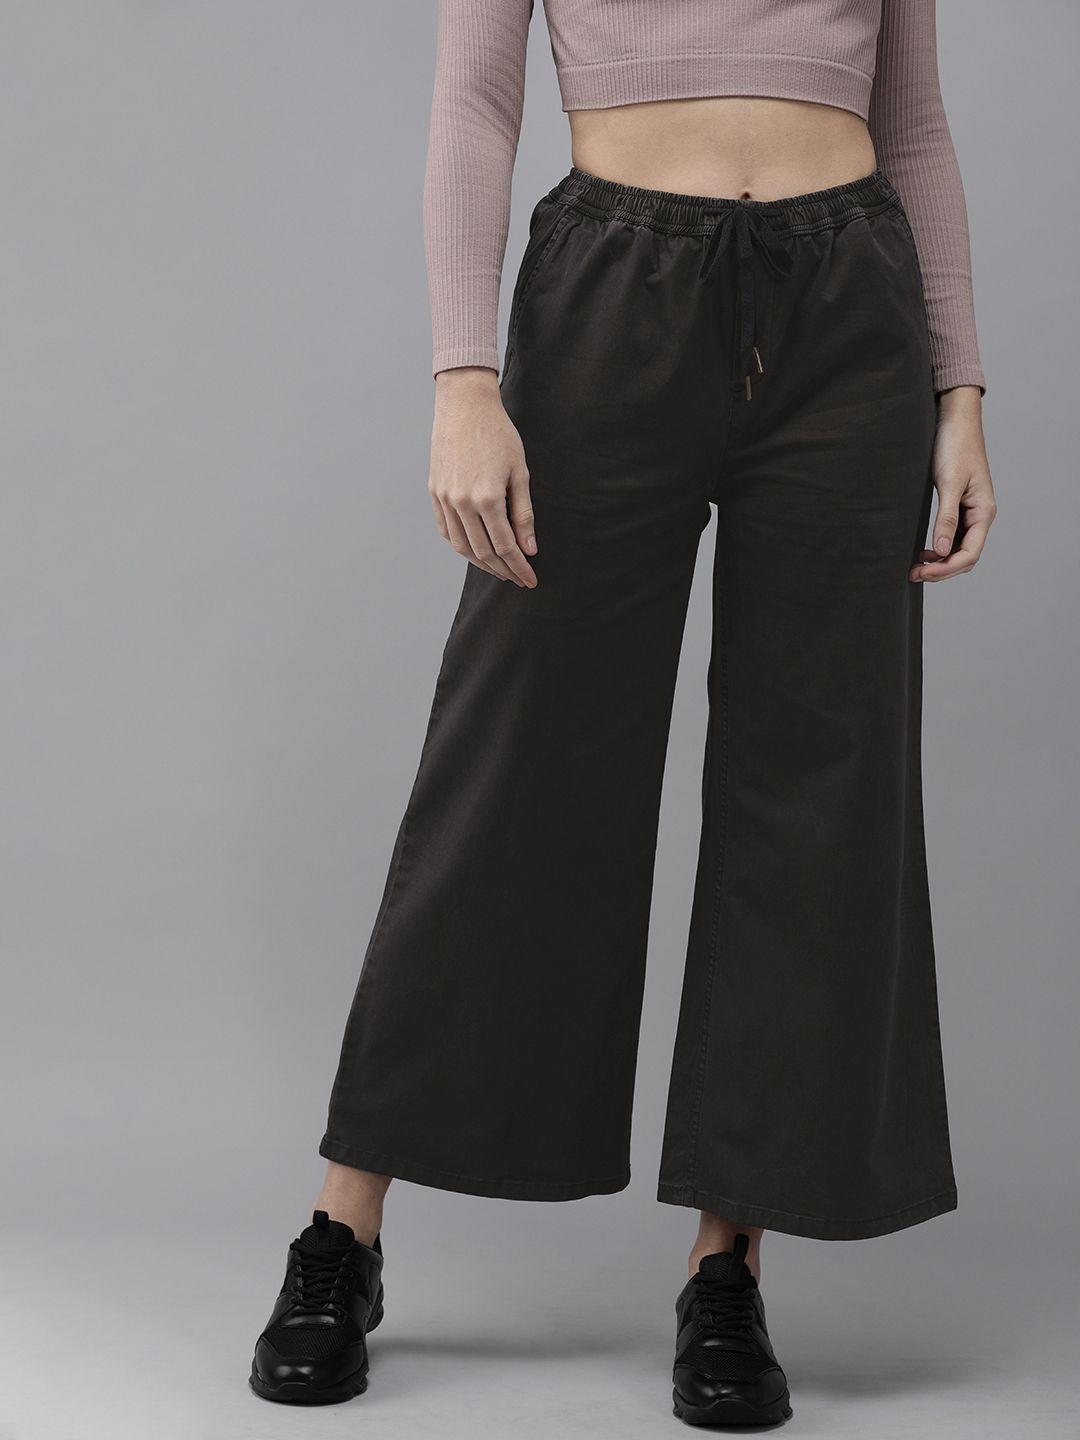 the roadster lifestyle co women black flared pleated cropped chinos